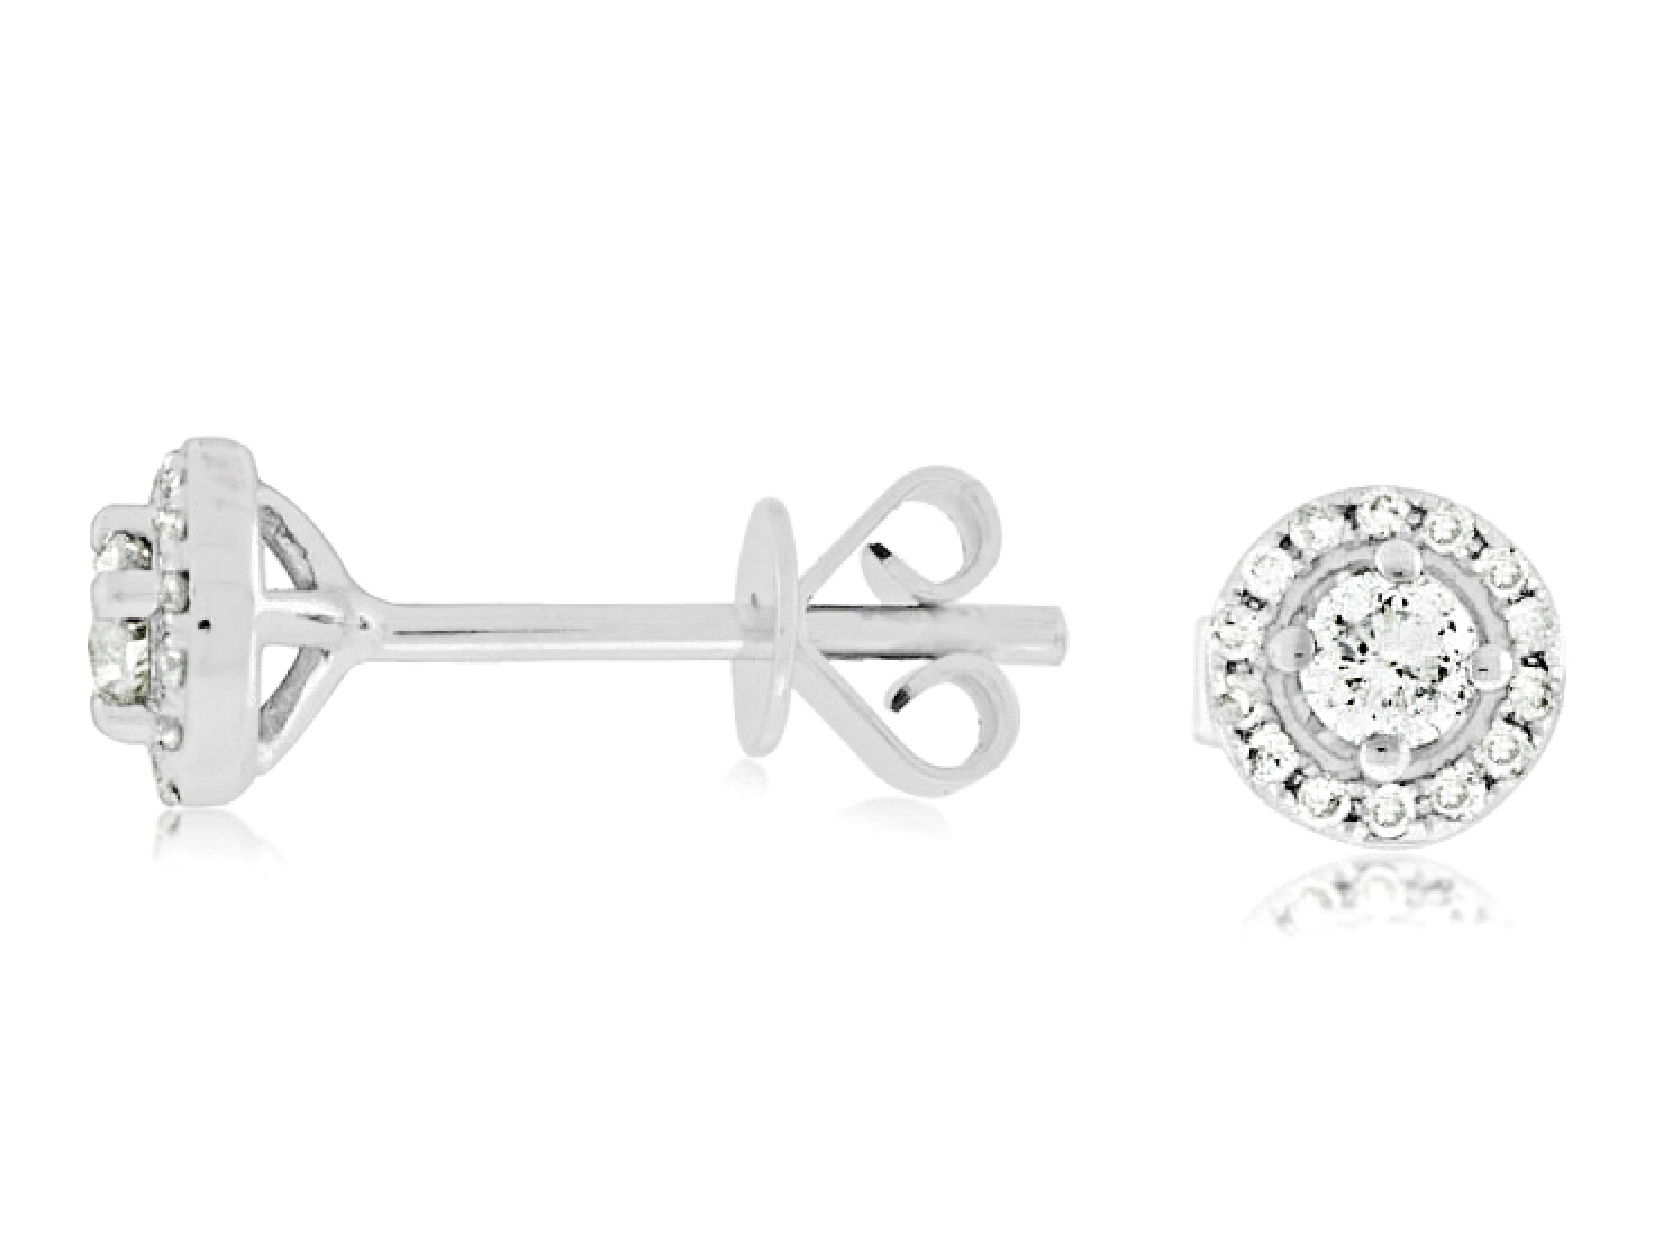 14K White Gold Diamond Earrings with Halo and Friction Backs

0.25cttw Diamonds